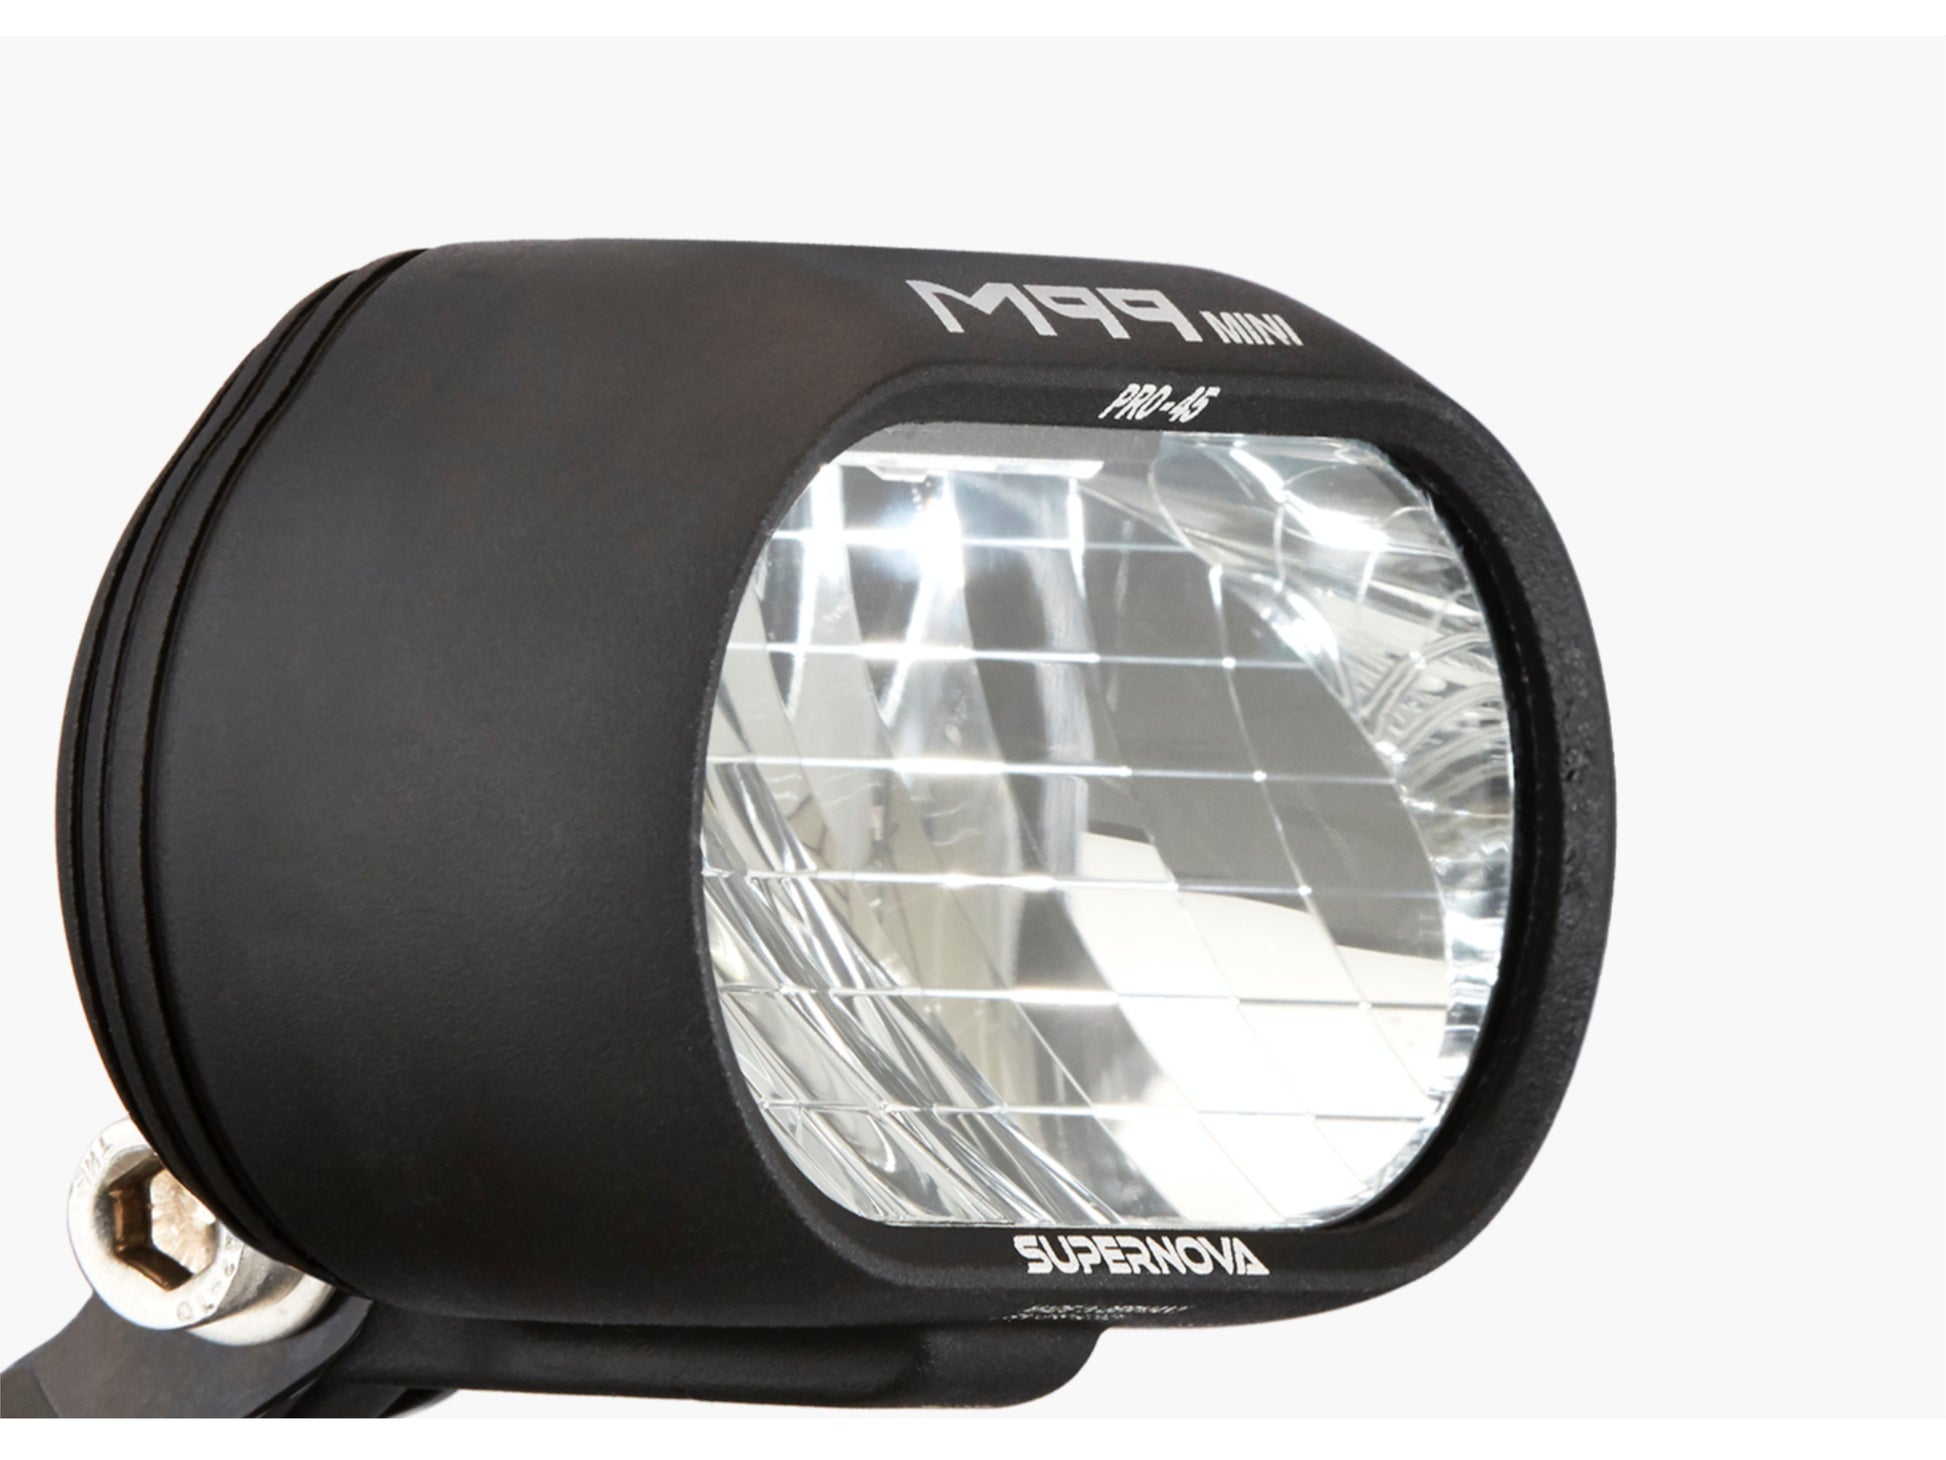 Riese and Muller Delite Mountain Touring eMTB full suspension close up Supernova M99 headlight